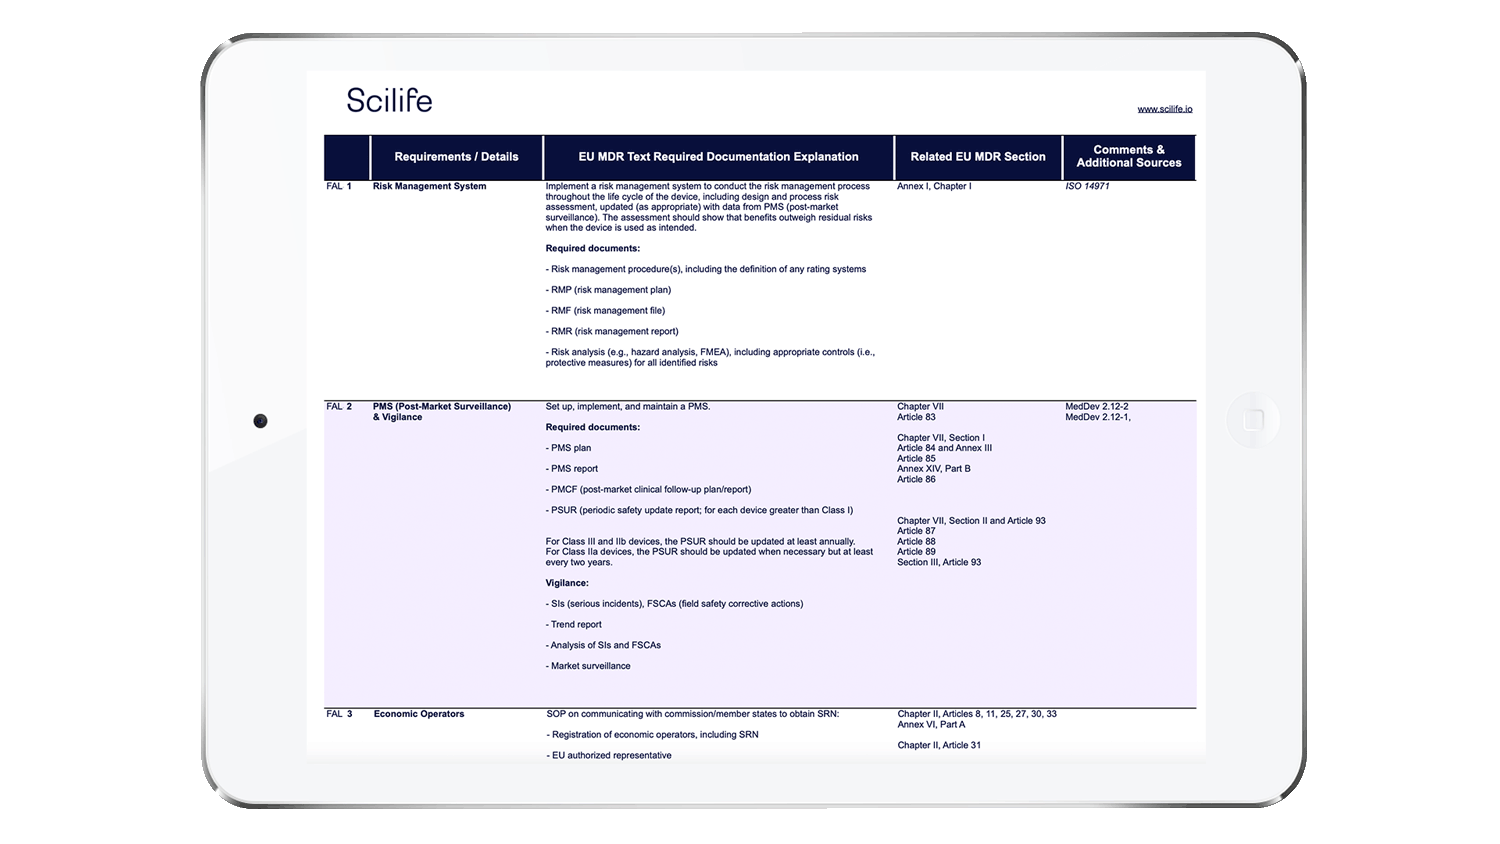 Ipad showing a part of the EU MDR Checklist | Scilife